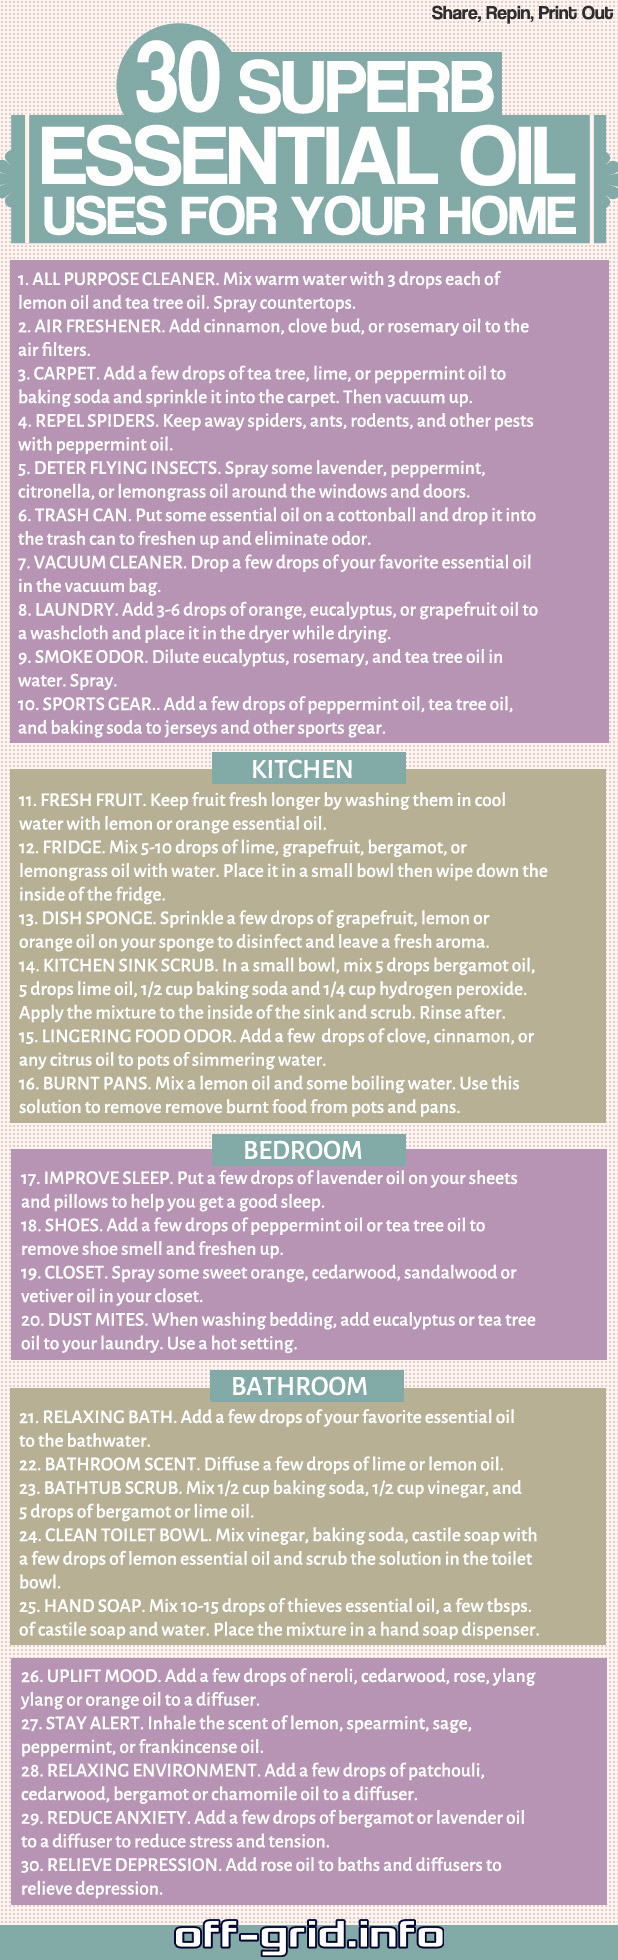 30 Superb Essential Oil Uses For Your Home (Infographic)